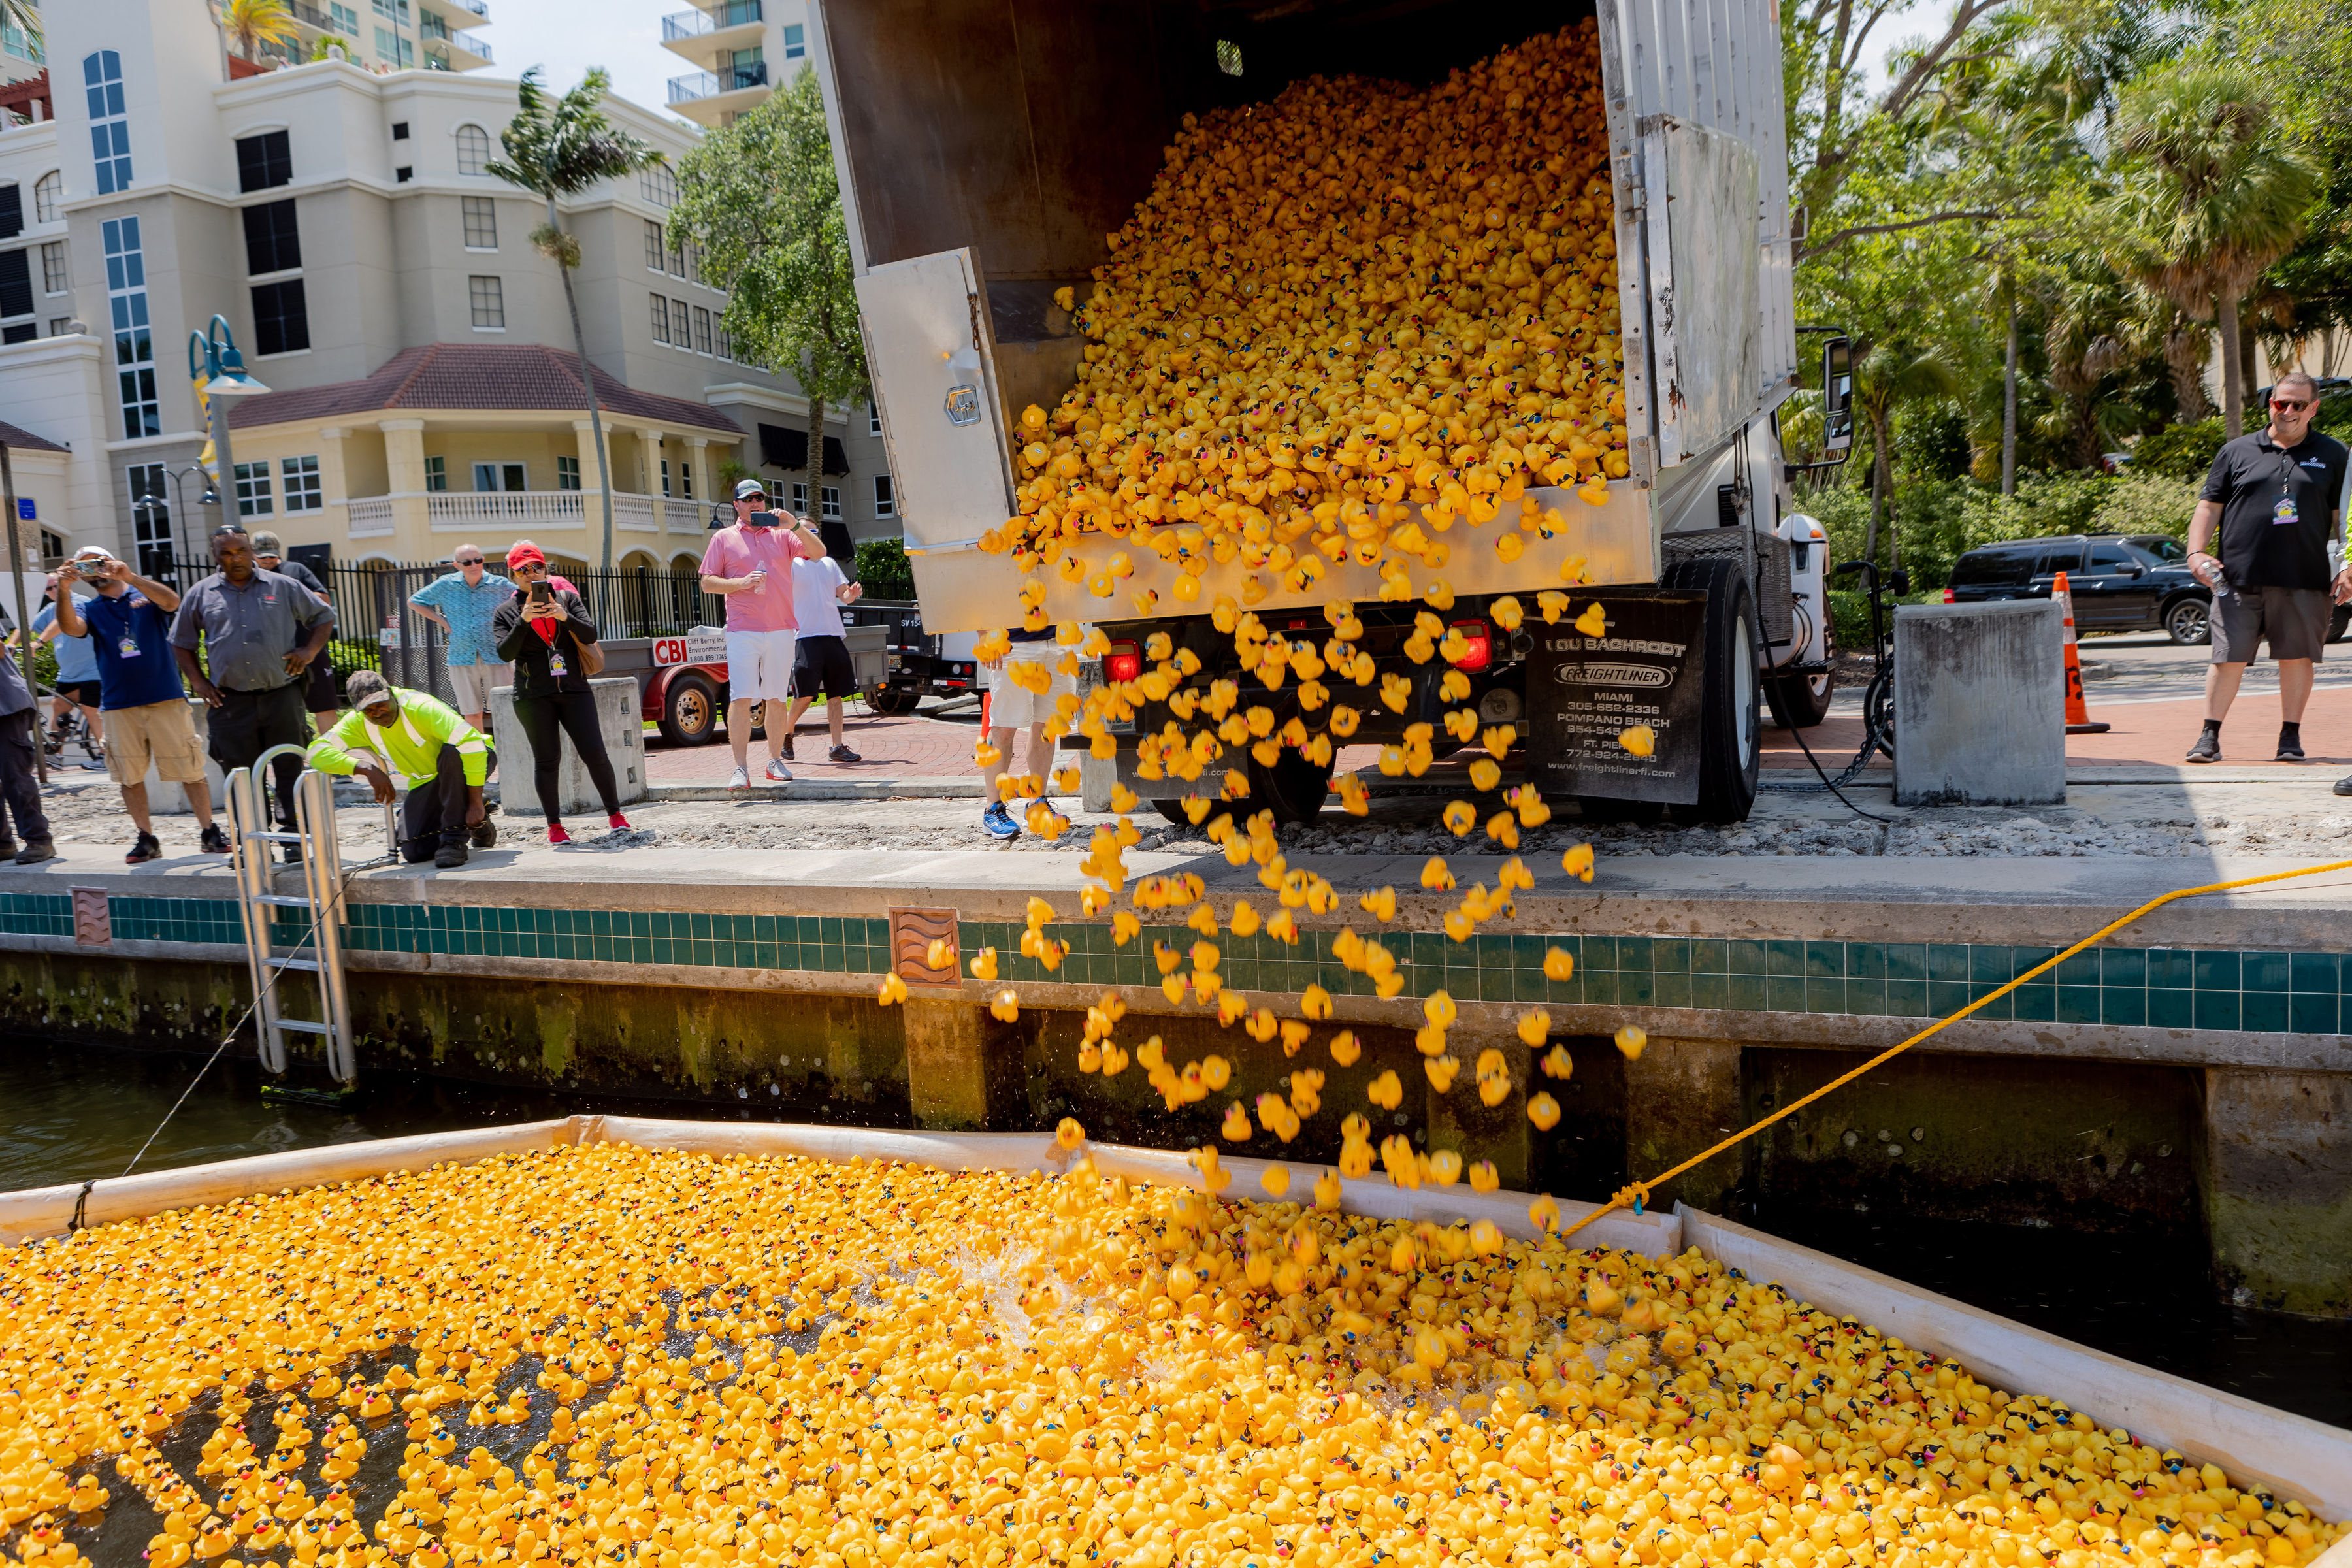 40000 rubber ducks available to adopt in support of Kids In Distress